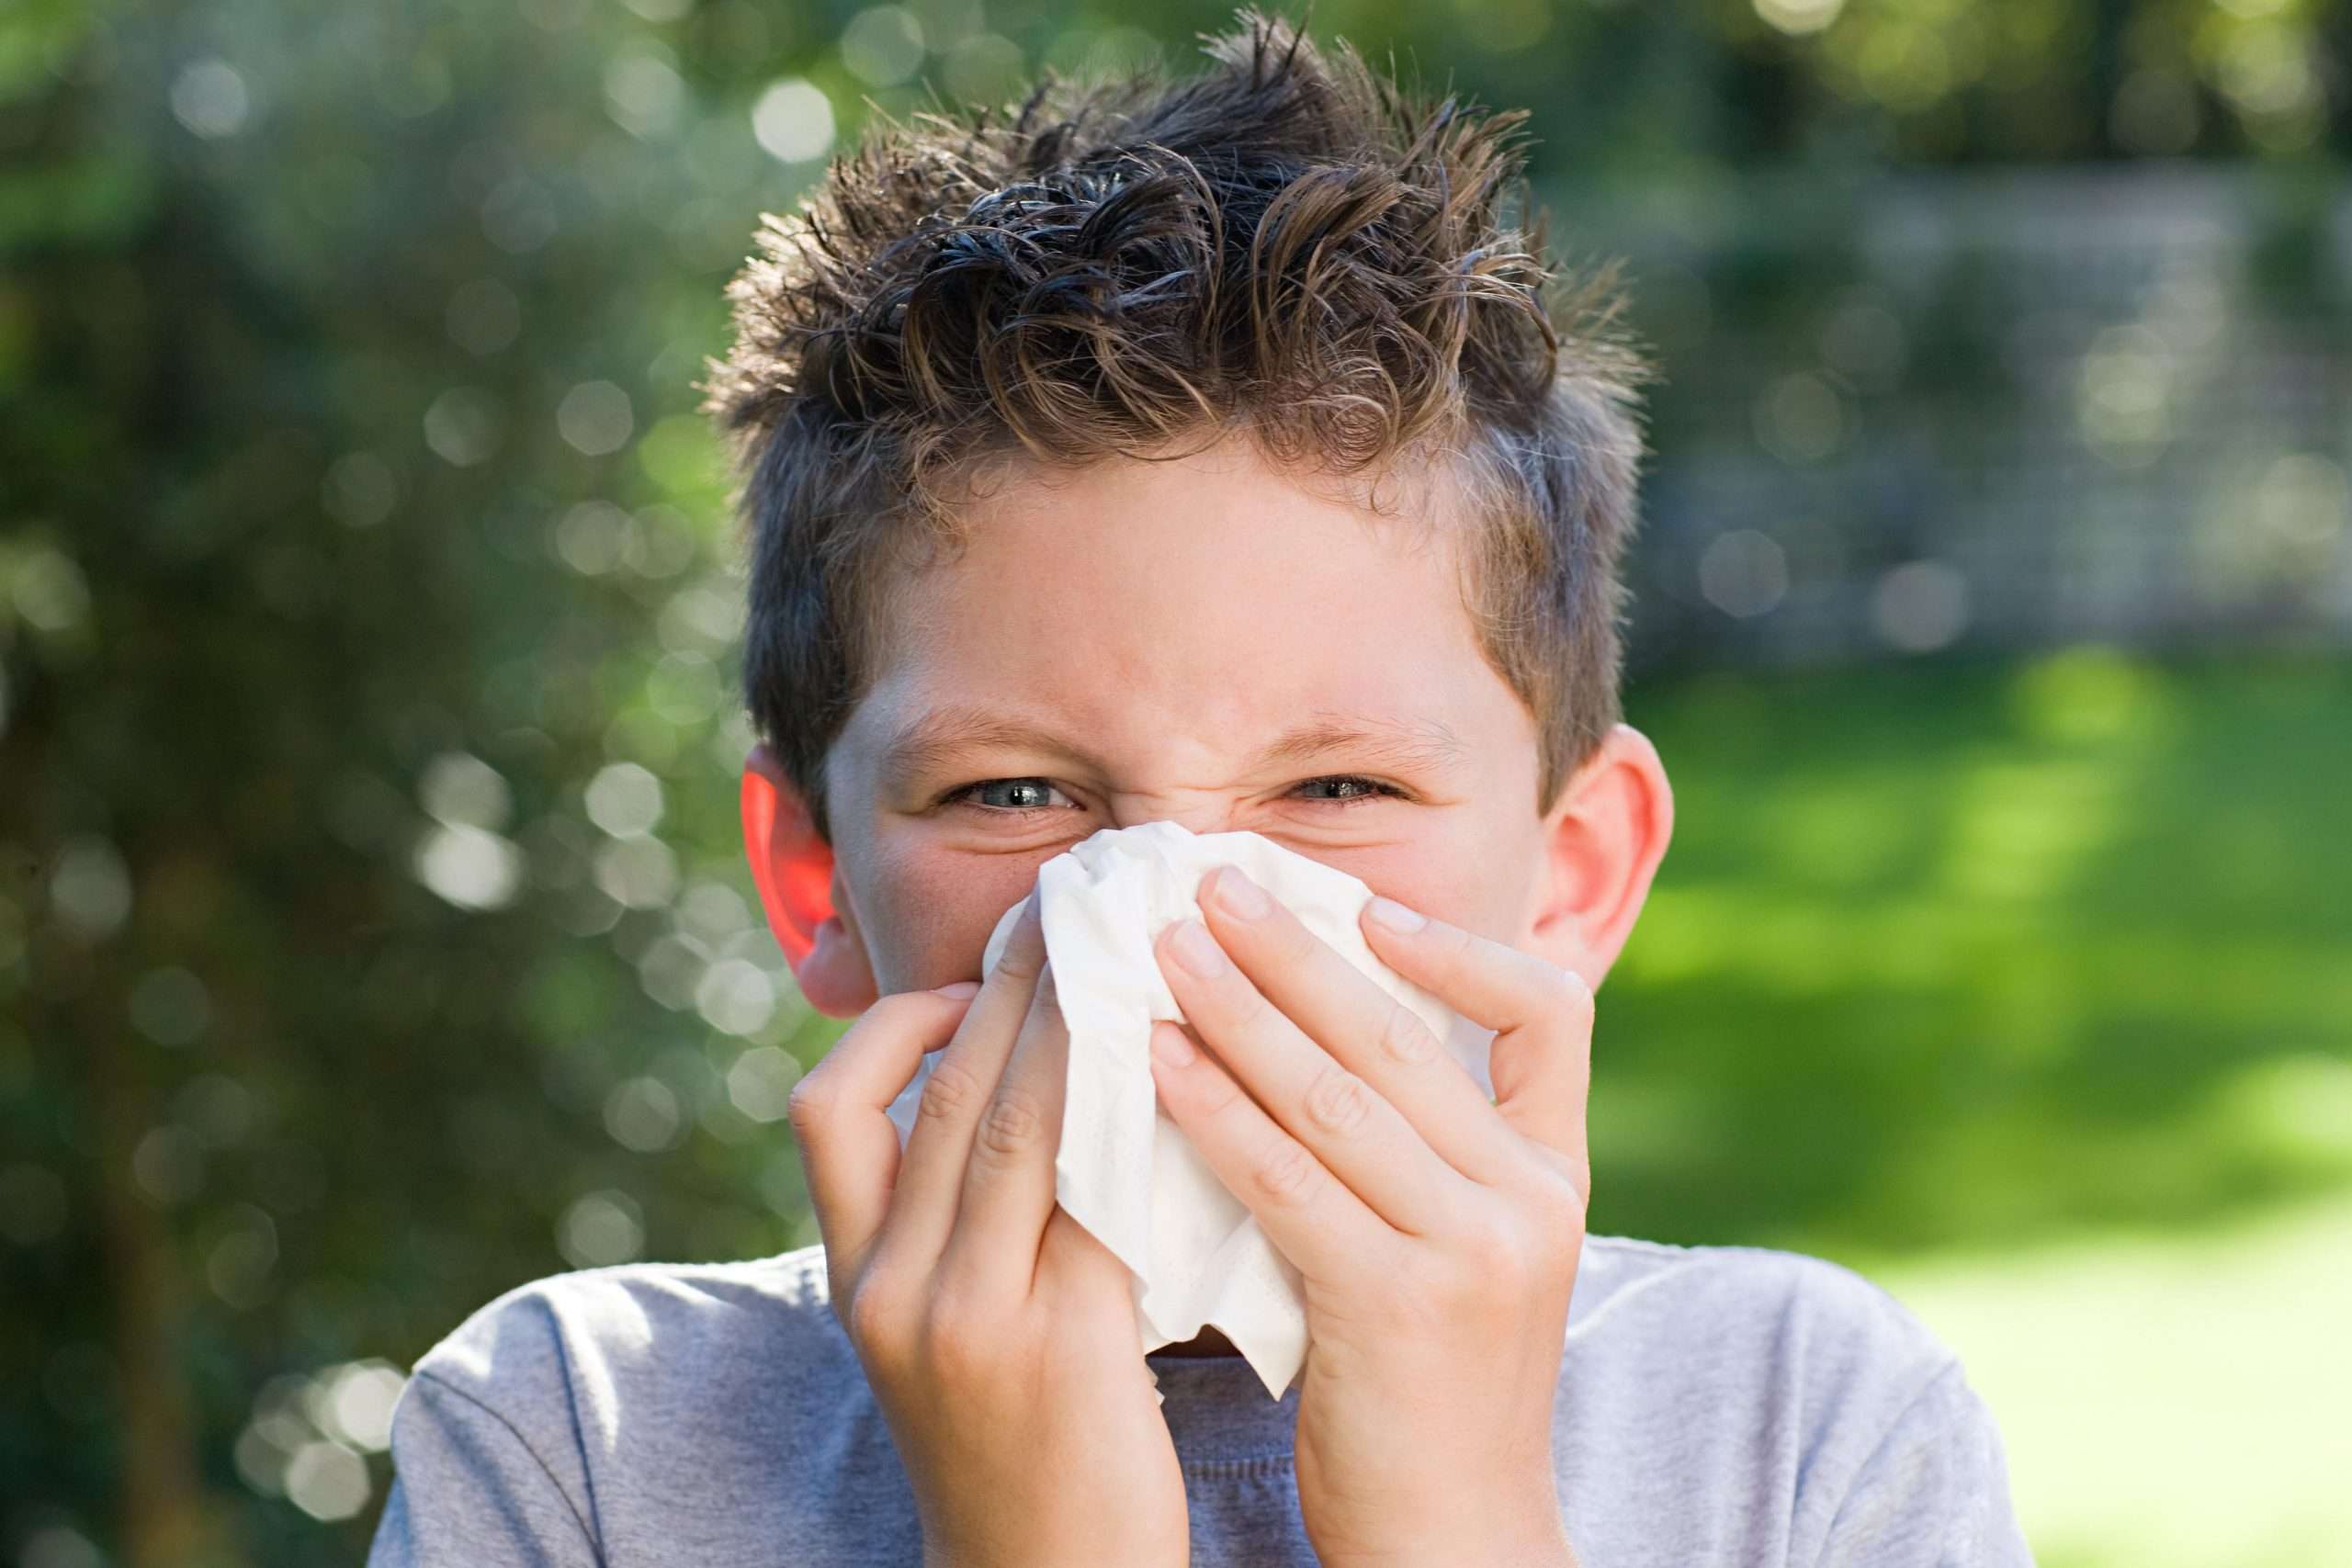 Does My Child Have a Cold or Allergies?